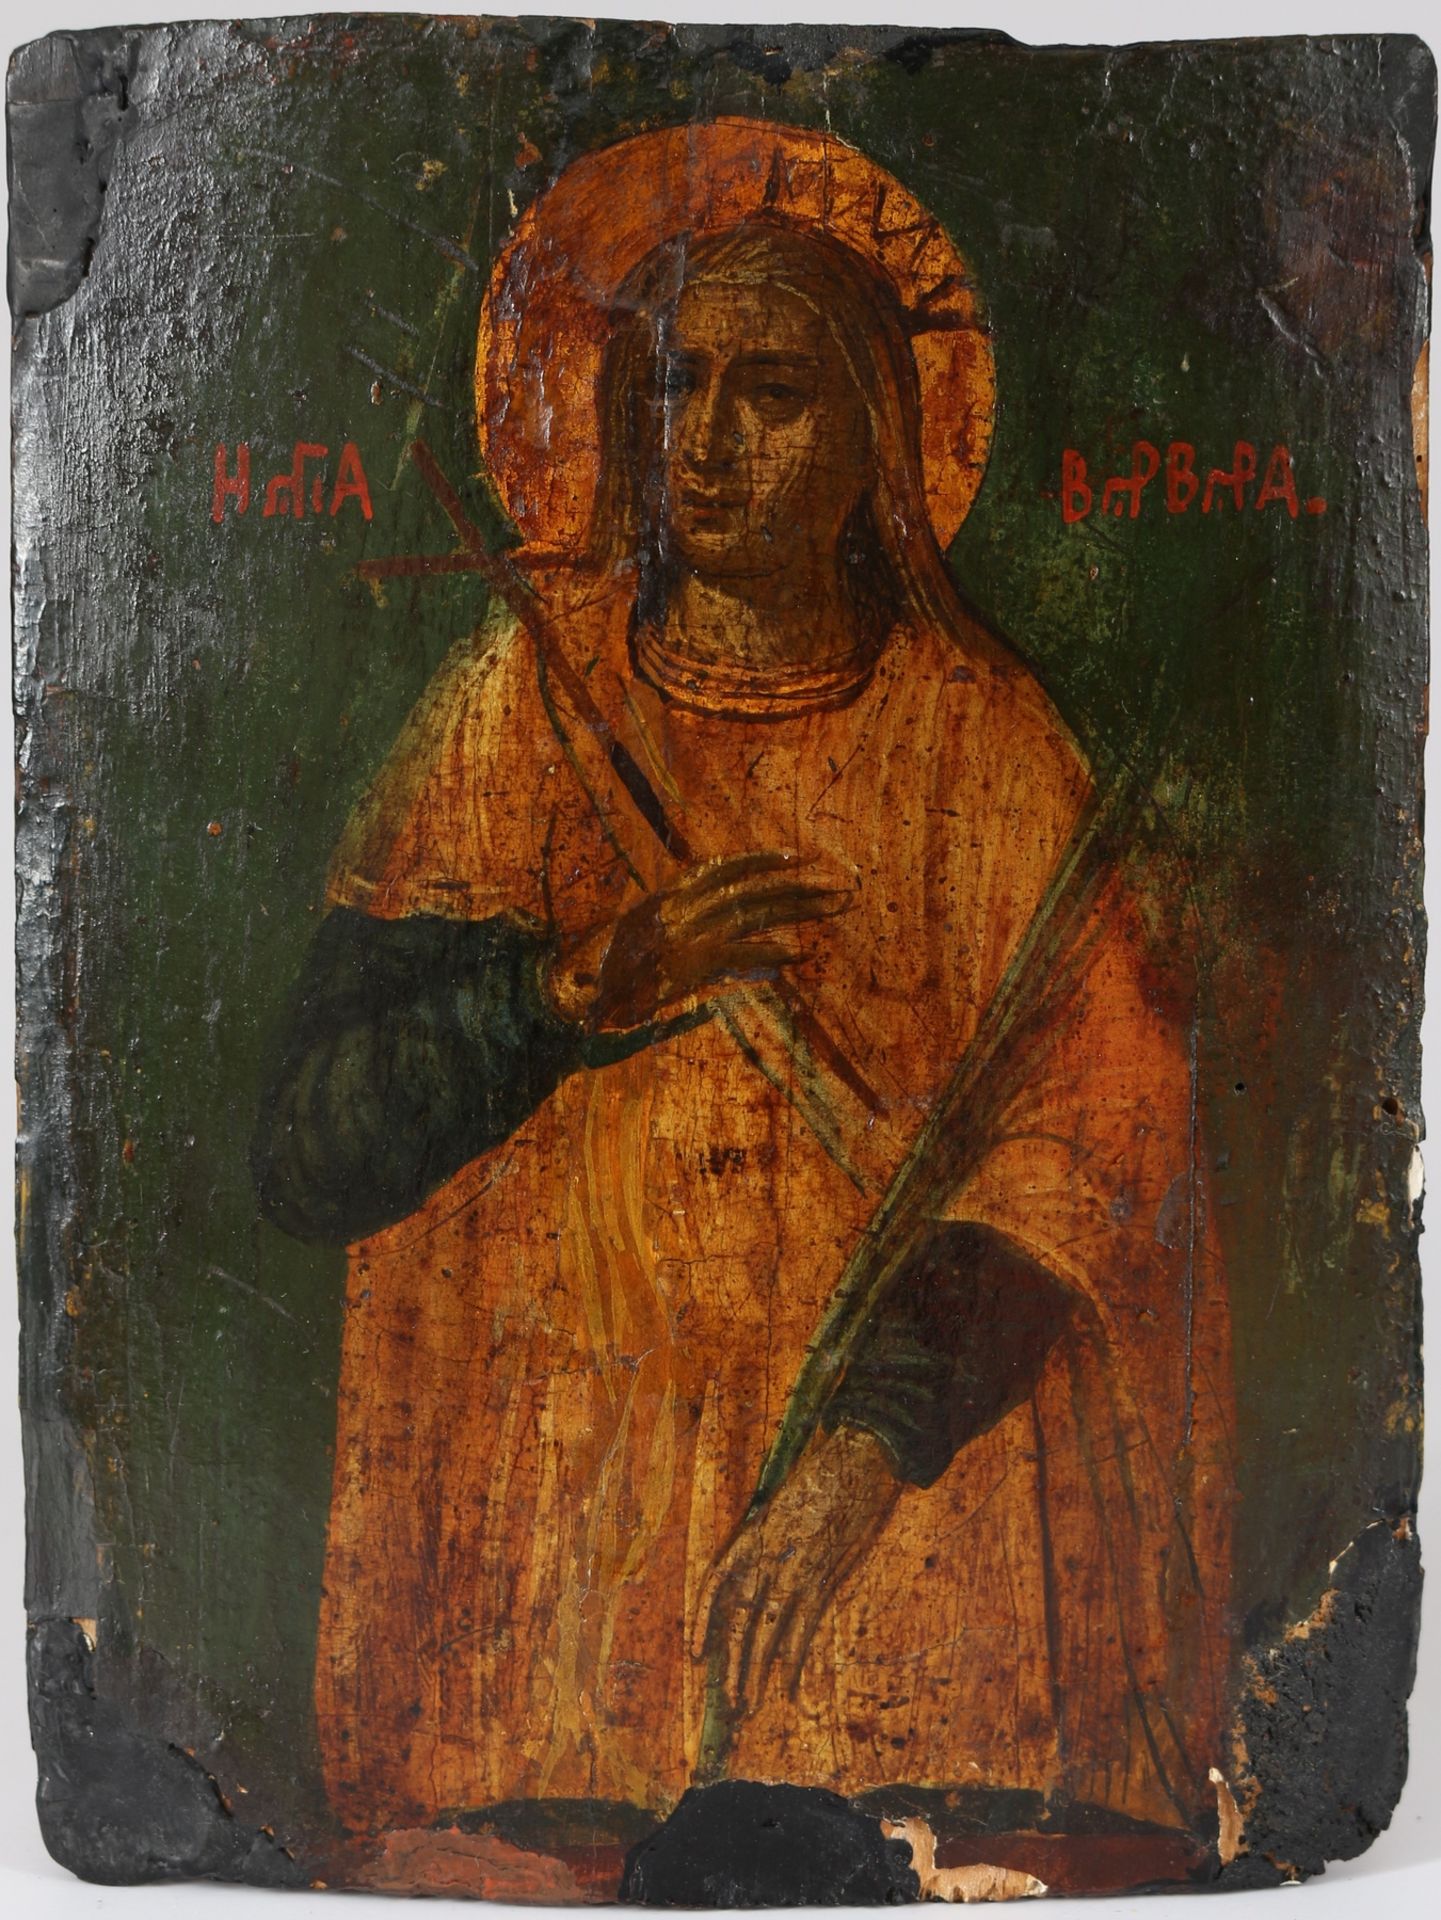 3 Madonnen Ikonen, icons with holy mary, - Image 3 of 5